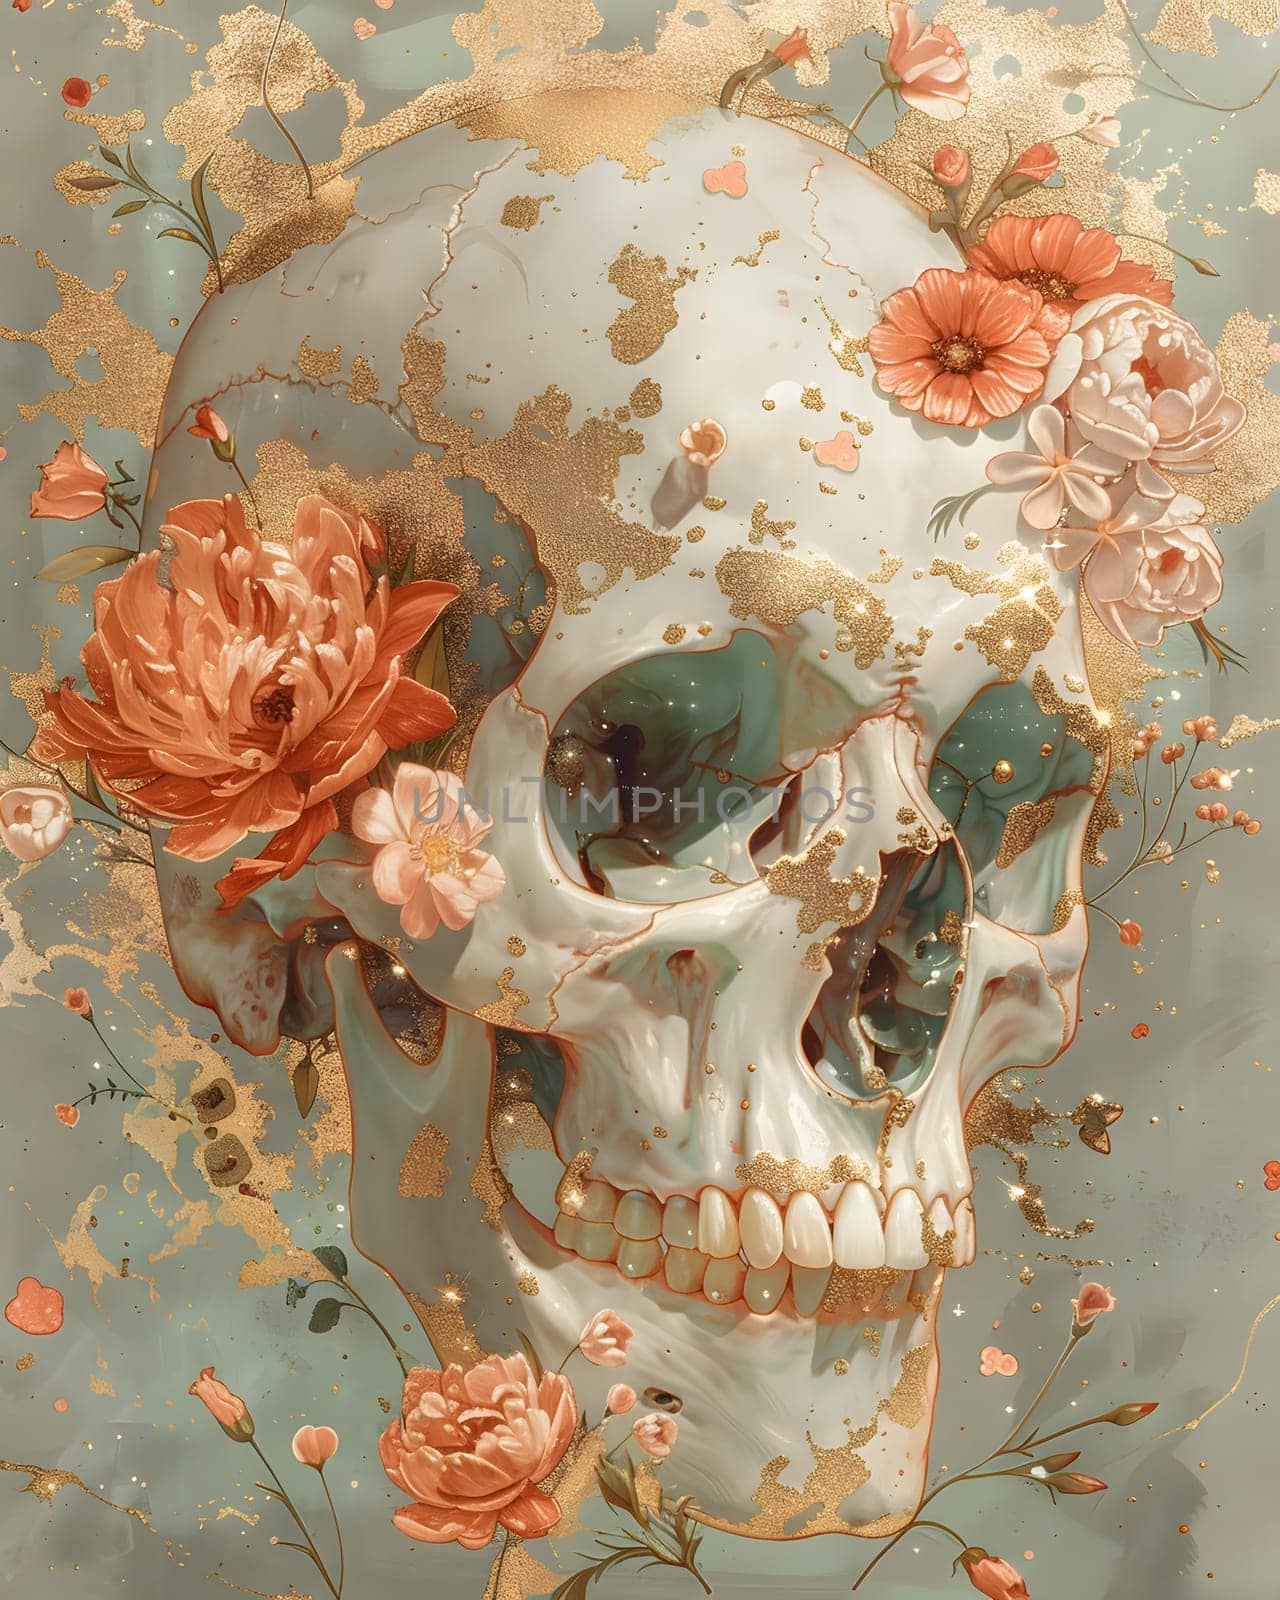 Skull surrounded by flowers in a blue painting, a striking visual arts piece by Nadtochiy